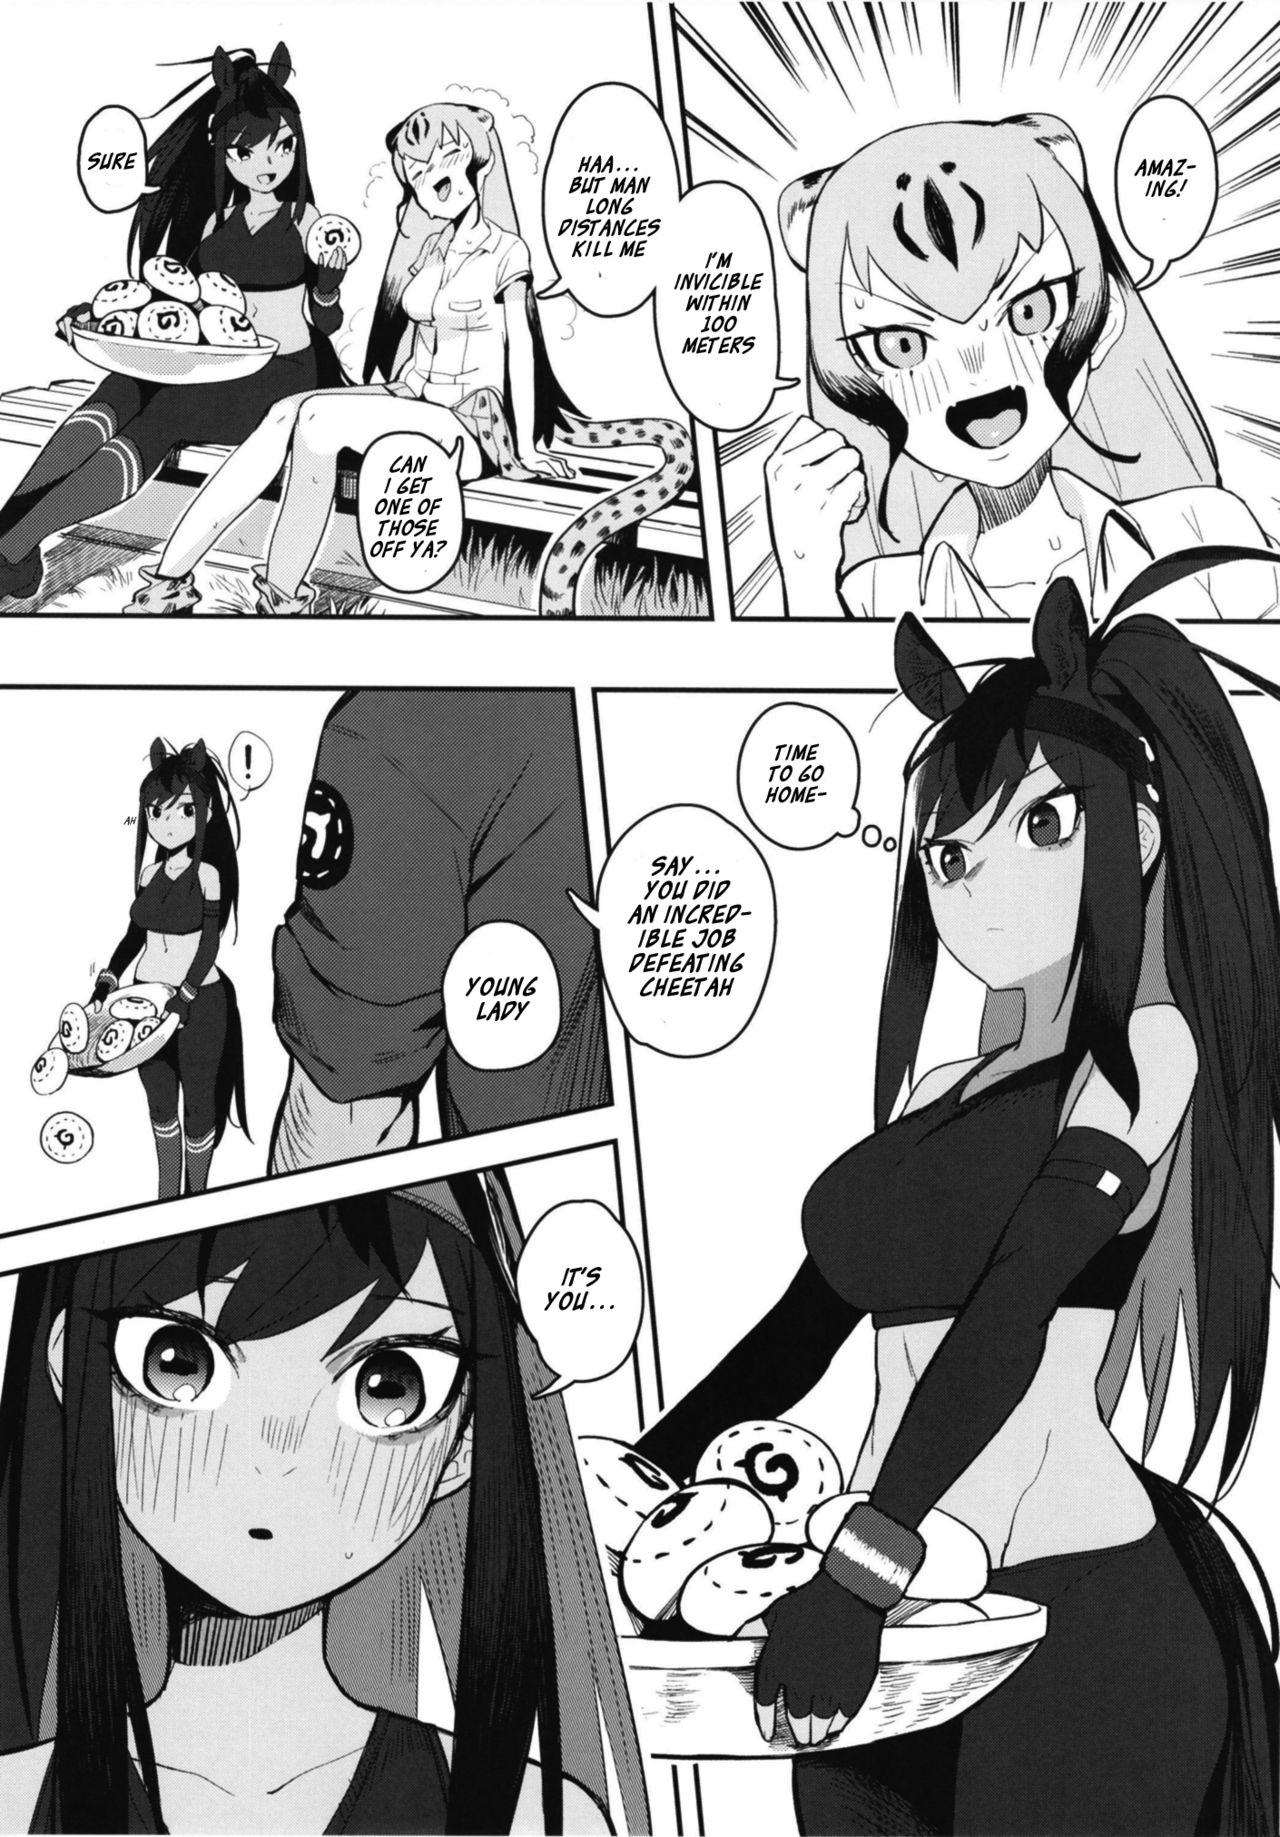 Rough Sex Porn Thoroughbred Early Days 2 - Kemono friends Plump - Page 7